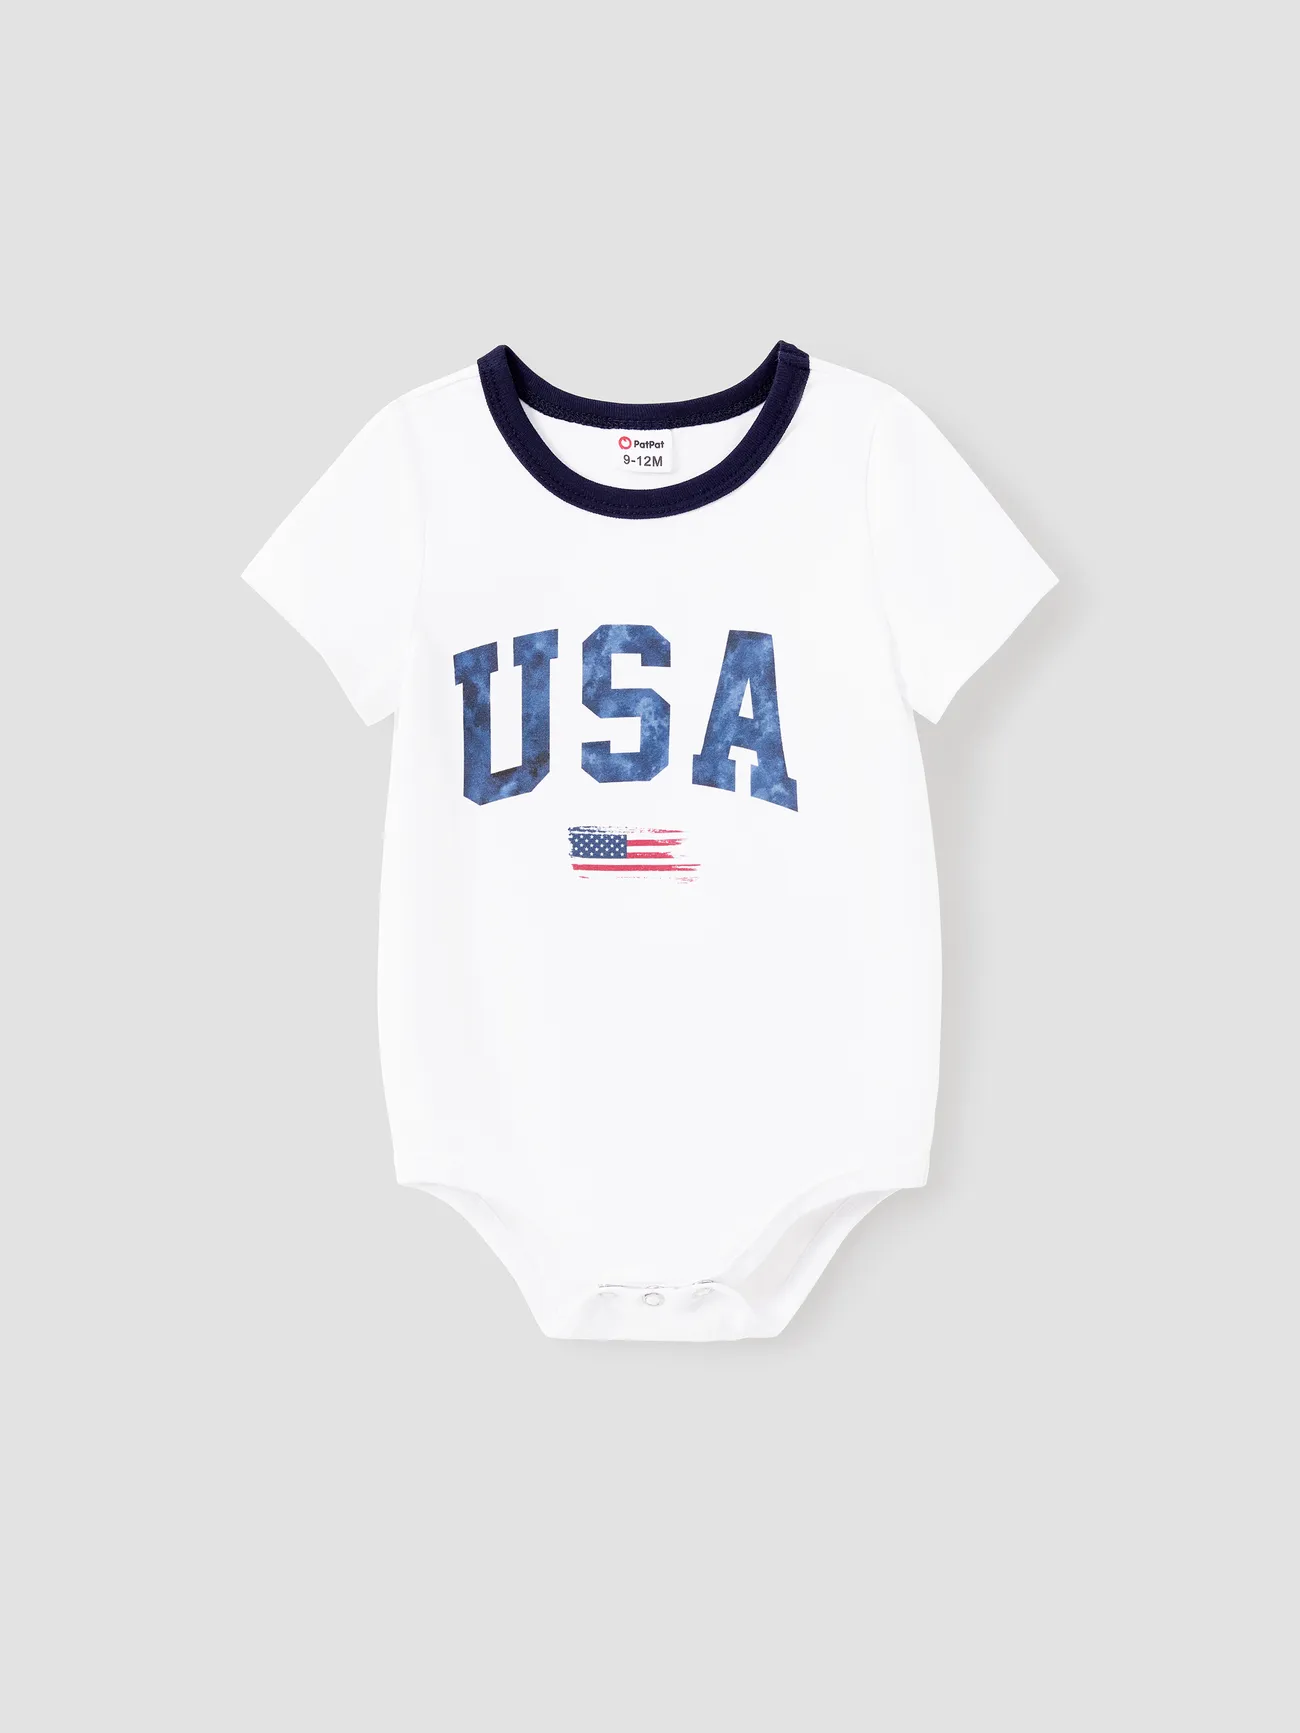 Independence Day Family Matching USA Print American Flag Cotton Short Sleeves Tops White big image 1